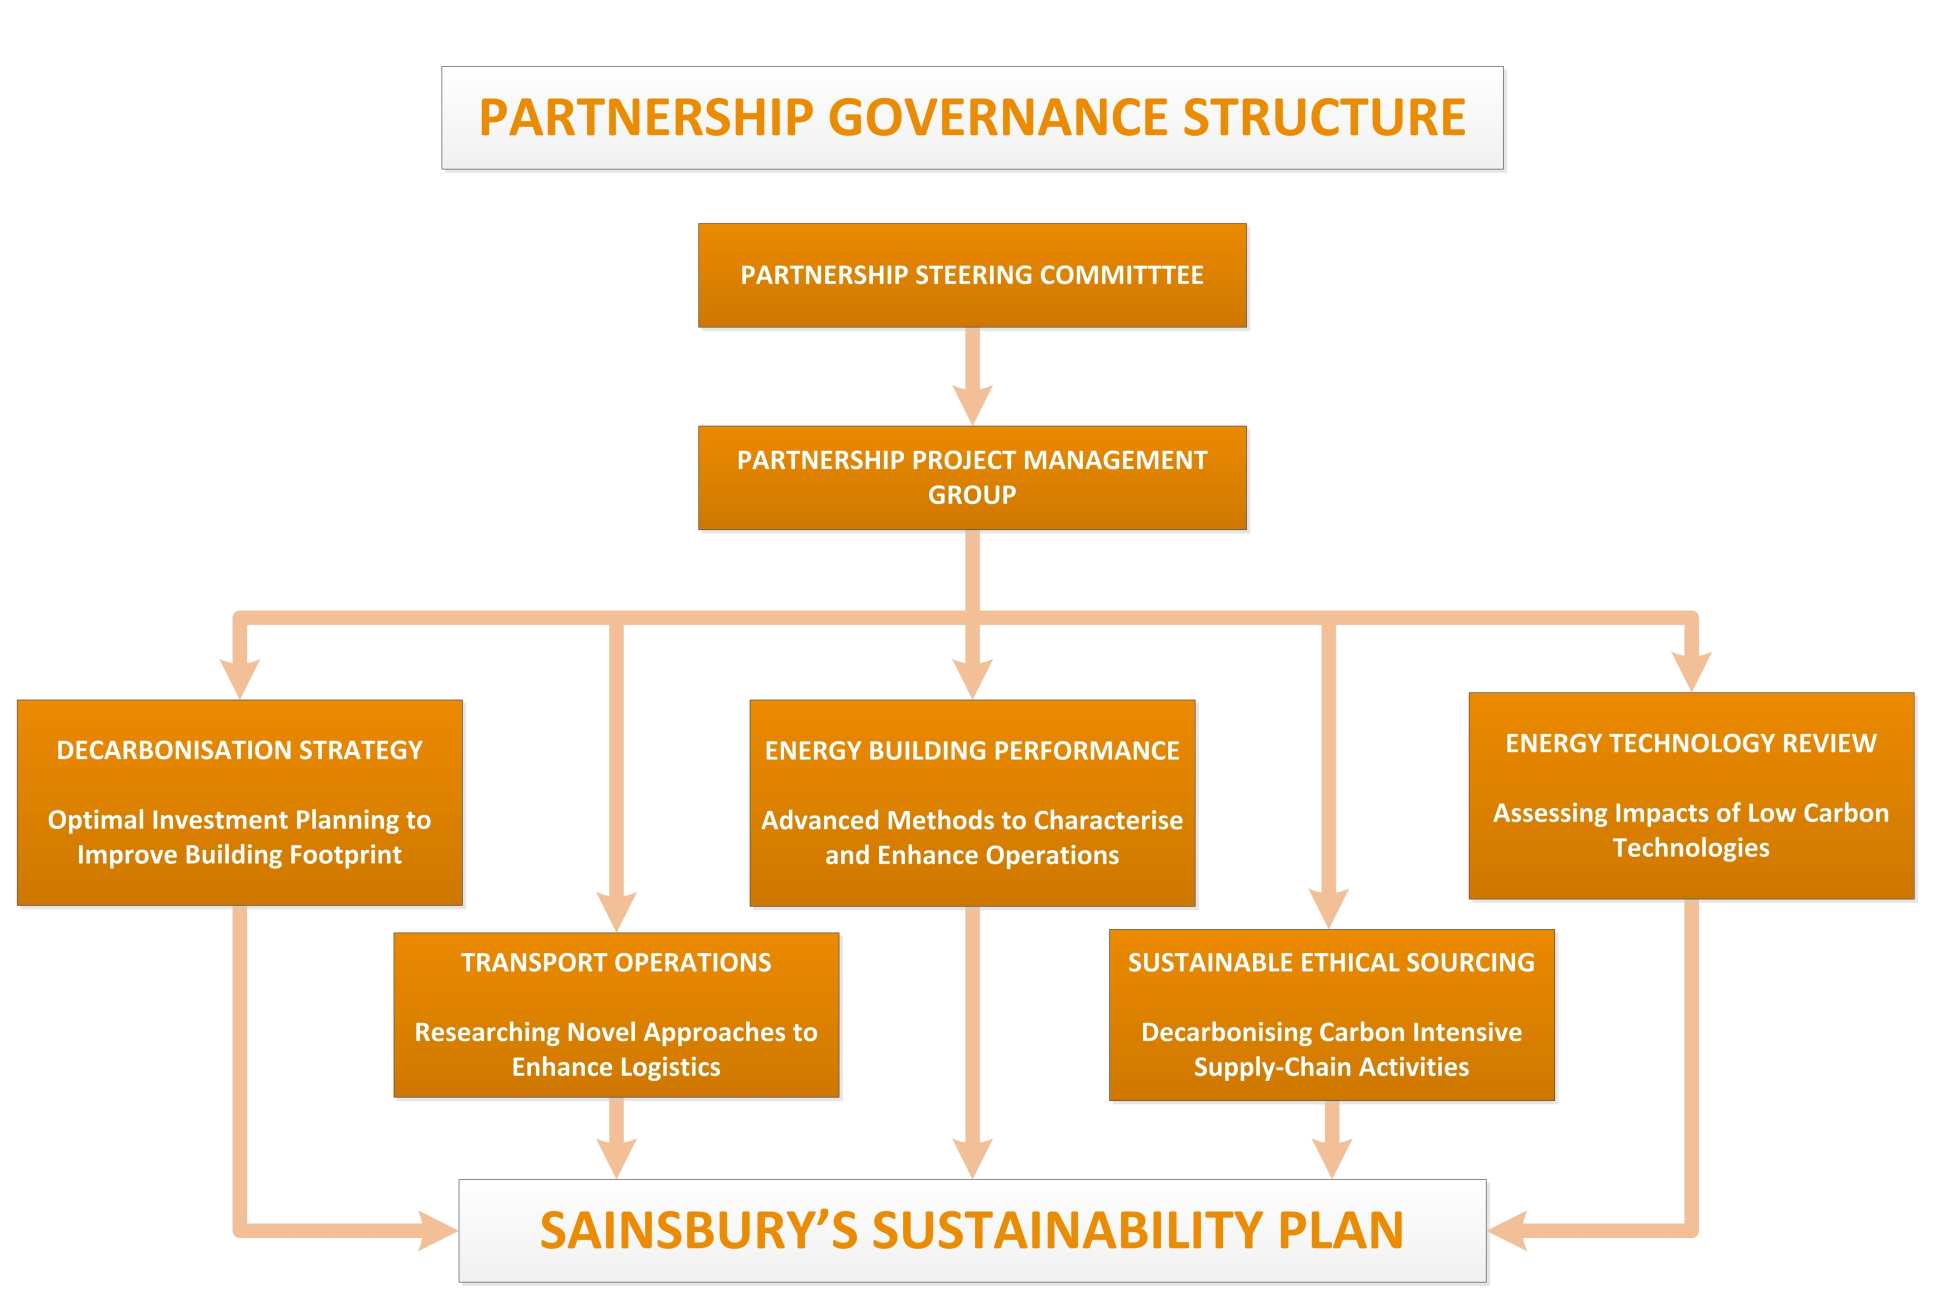 Imperial Sainsbury's Partnership Governance Structure